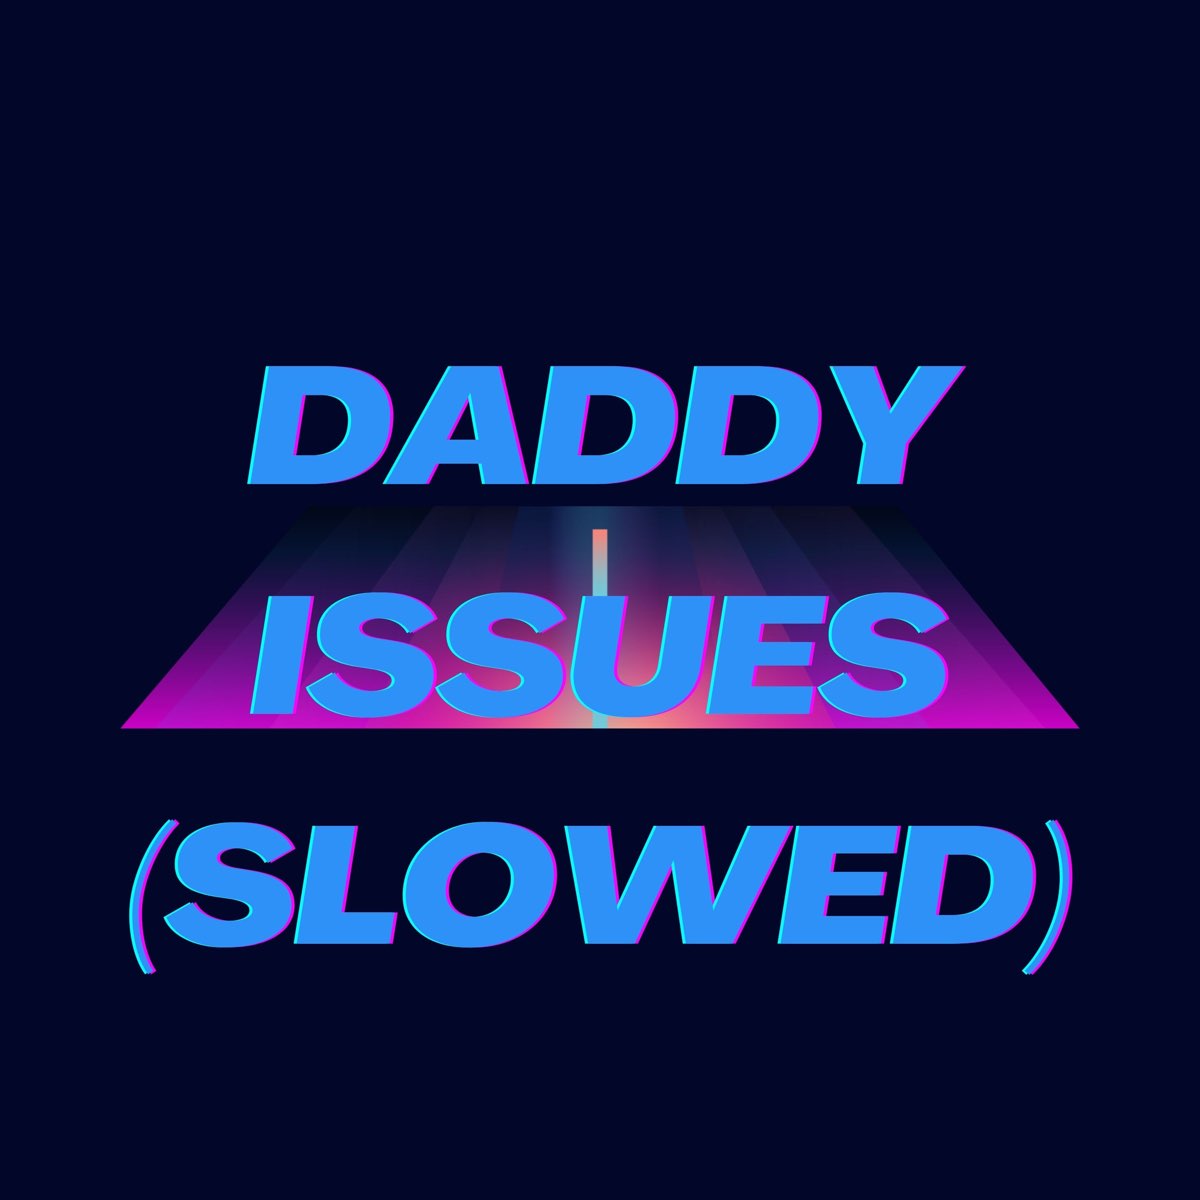 Issues remix. Daddy Issues. Eduardo XD. Daddy Issues Remix. Issues Slowed maitchh.